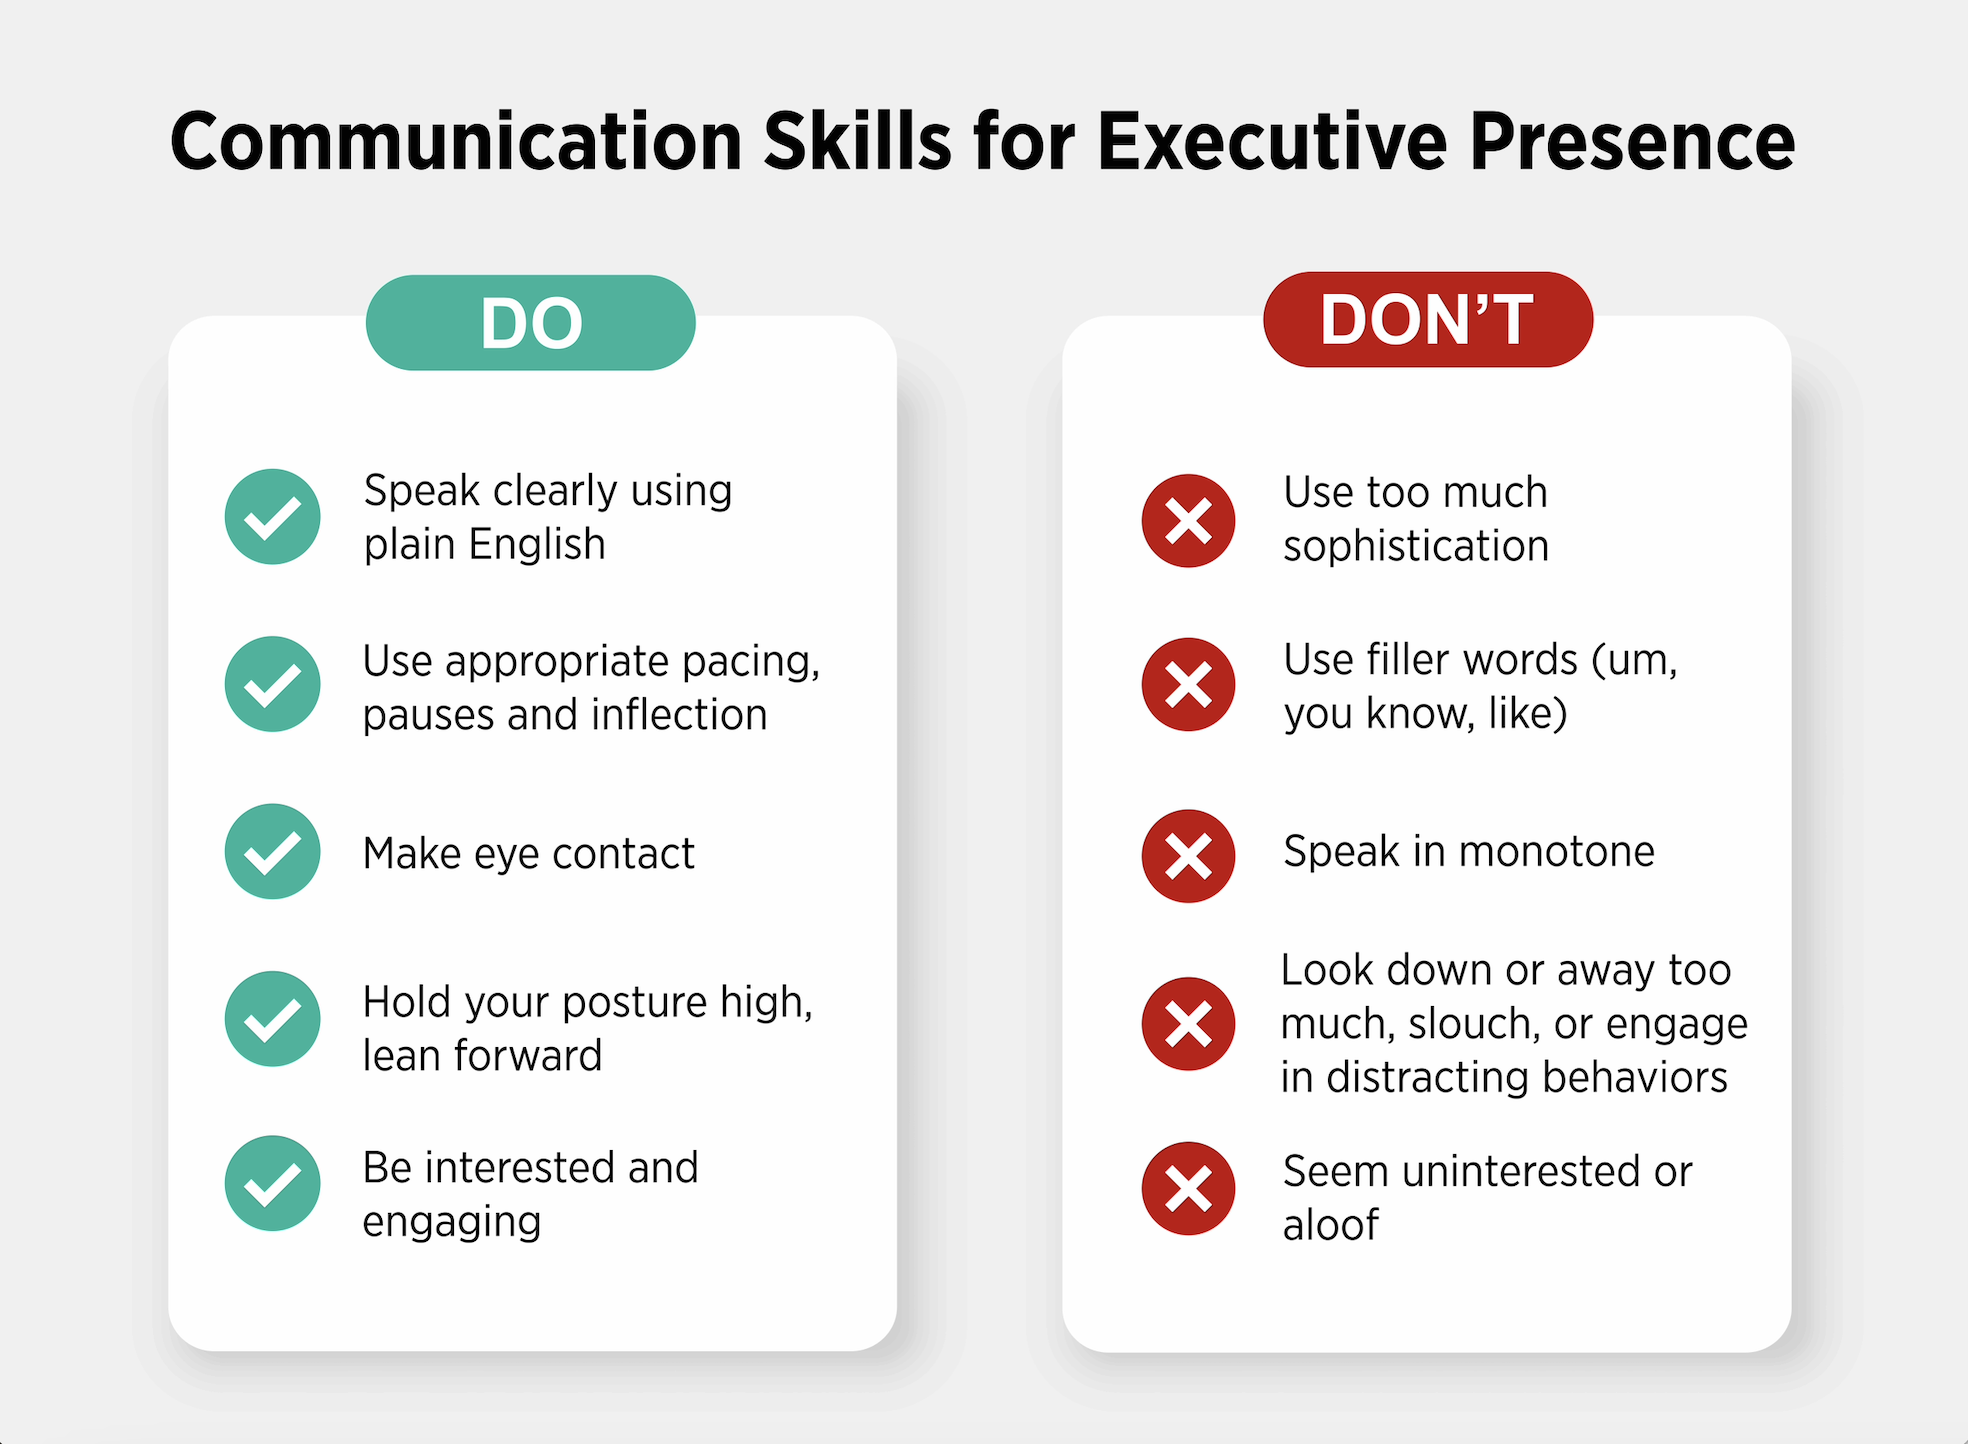 do's and don'ts list for executive presence